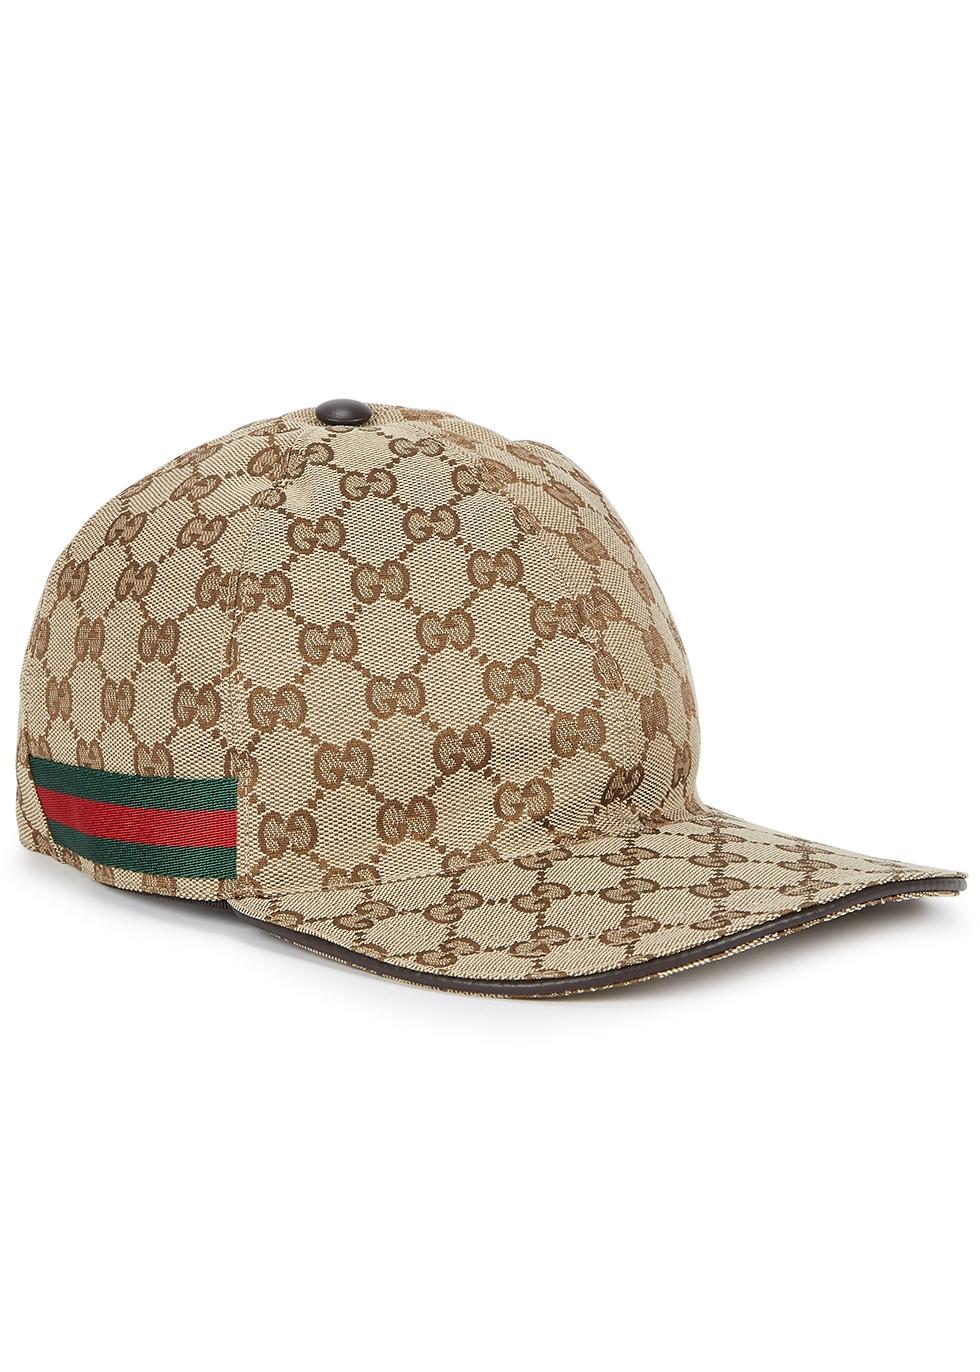 Gucci Gg Canvas Cap in Beige (Natural) for Men - Save 48% - Lyst